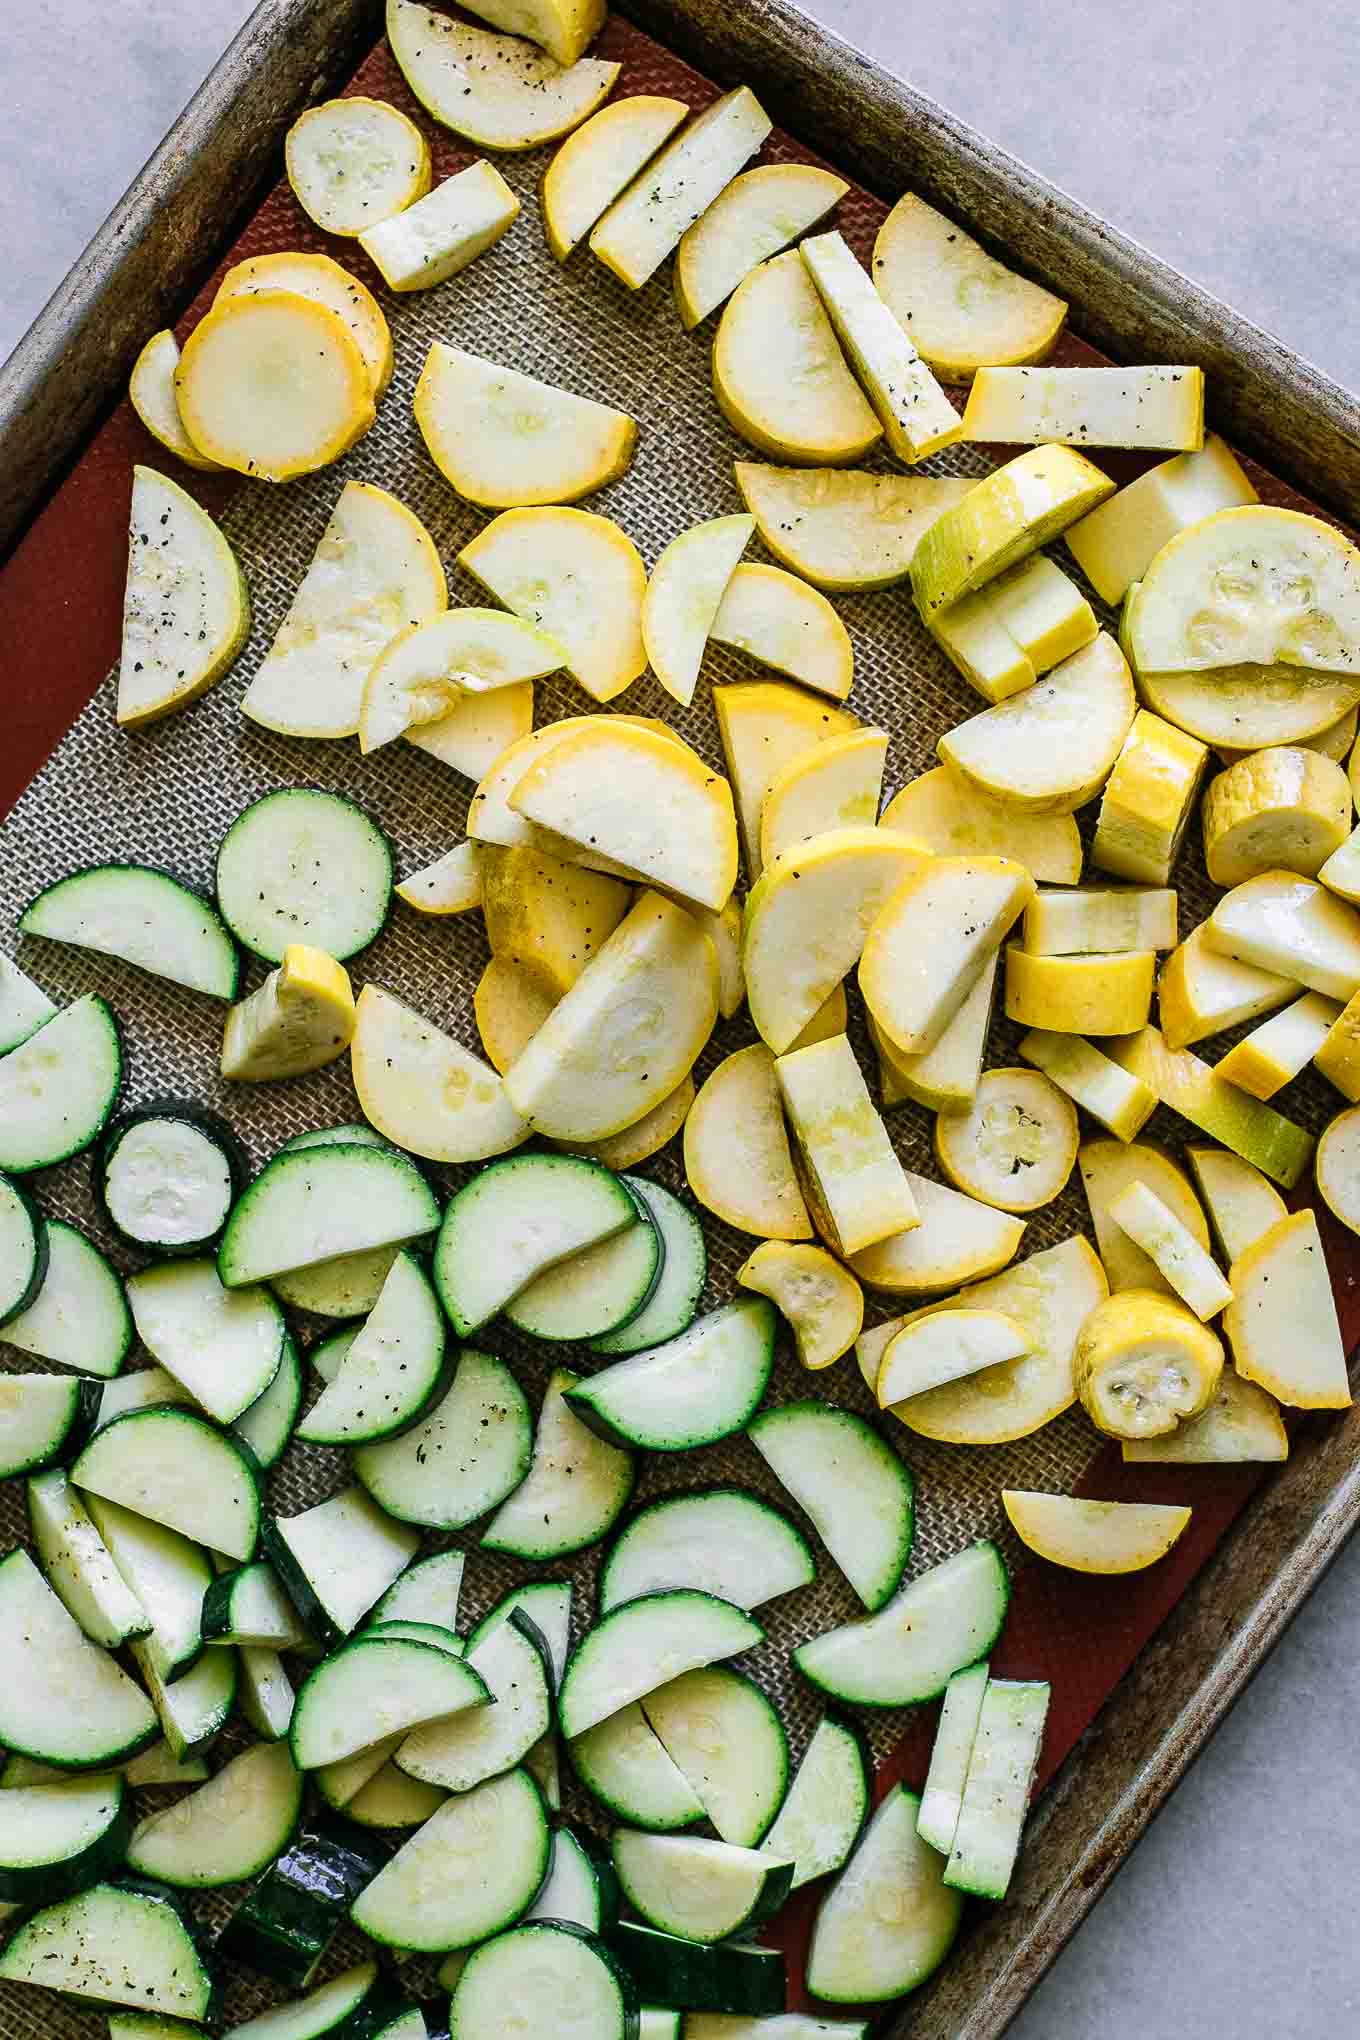 sliced yellow squash and zucchini on a roasting pan before baking